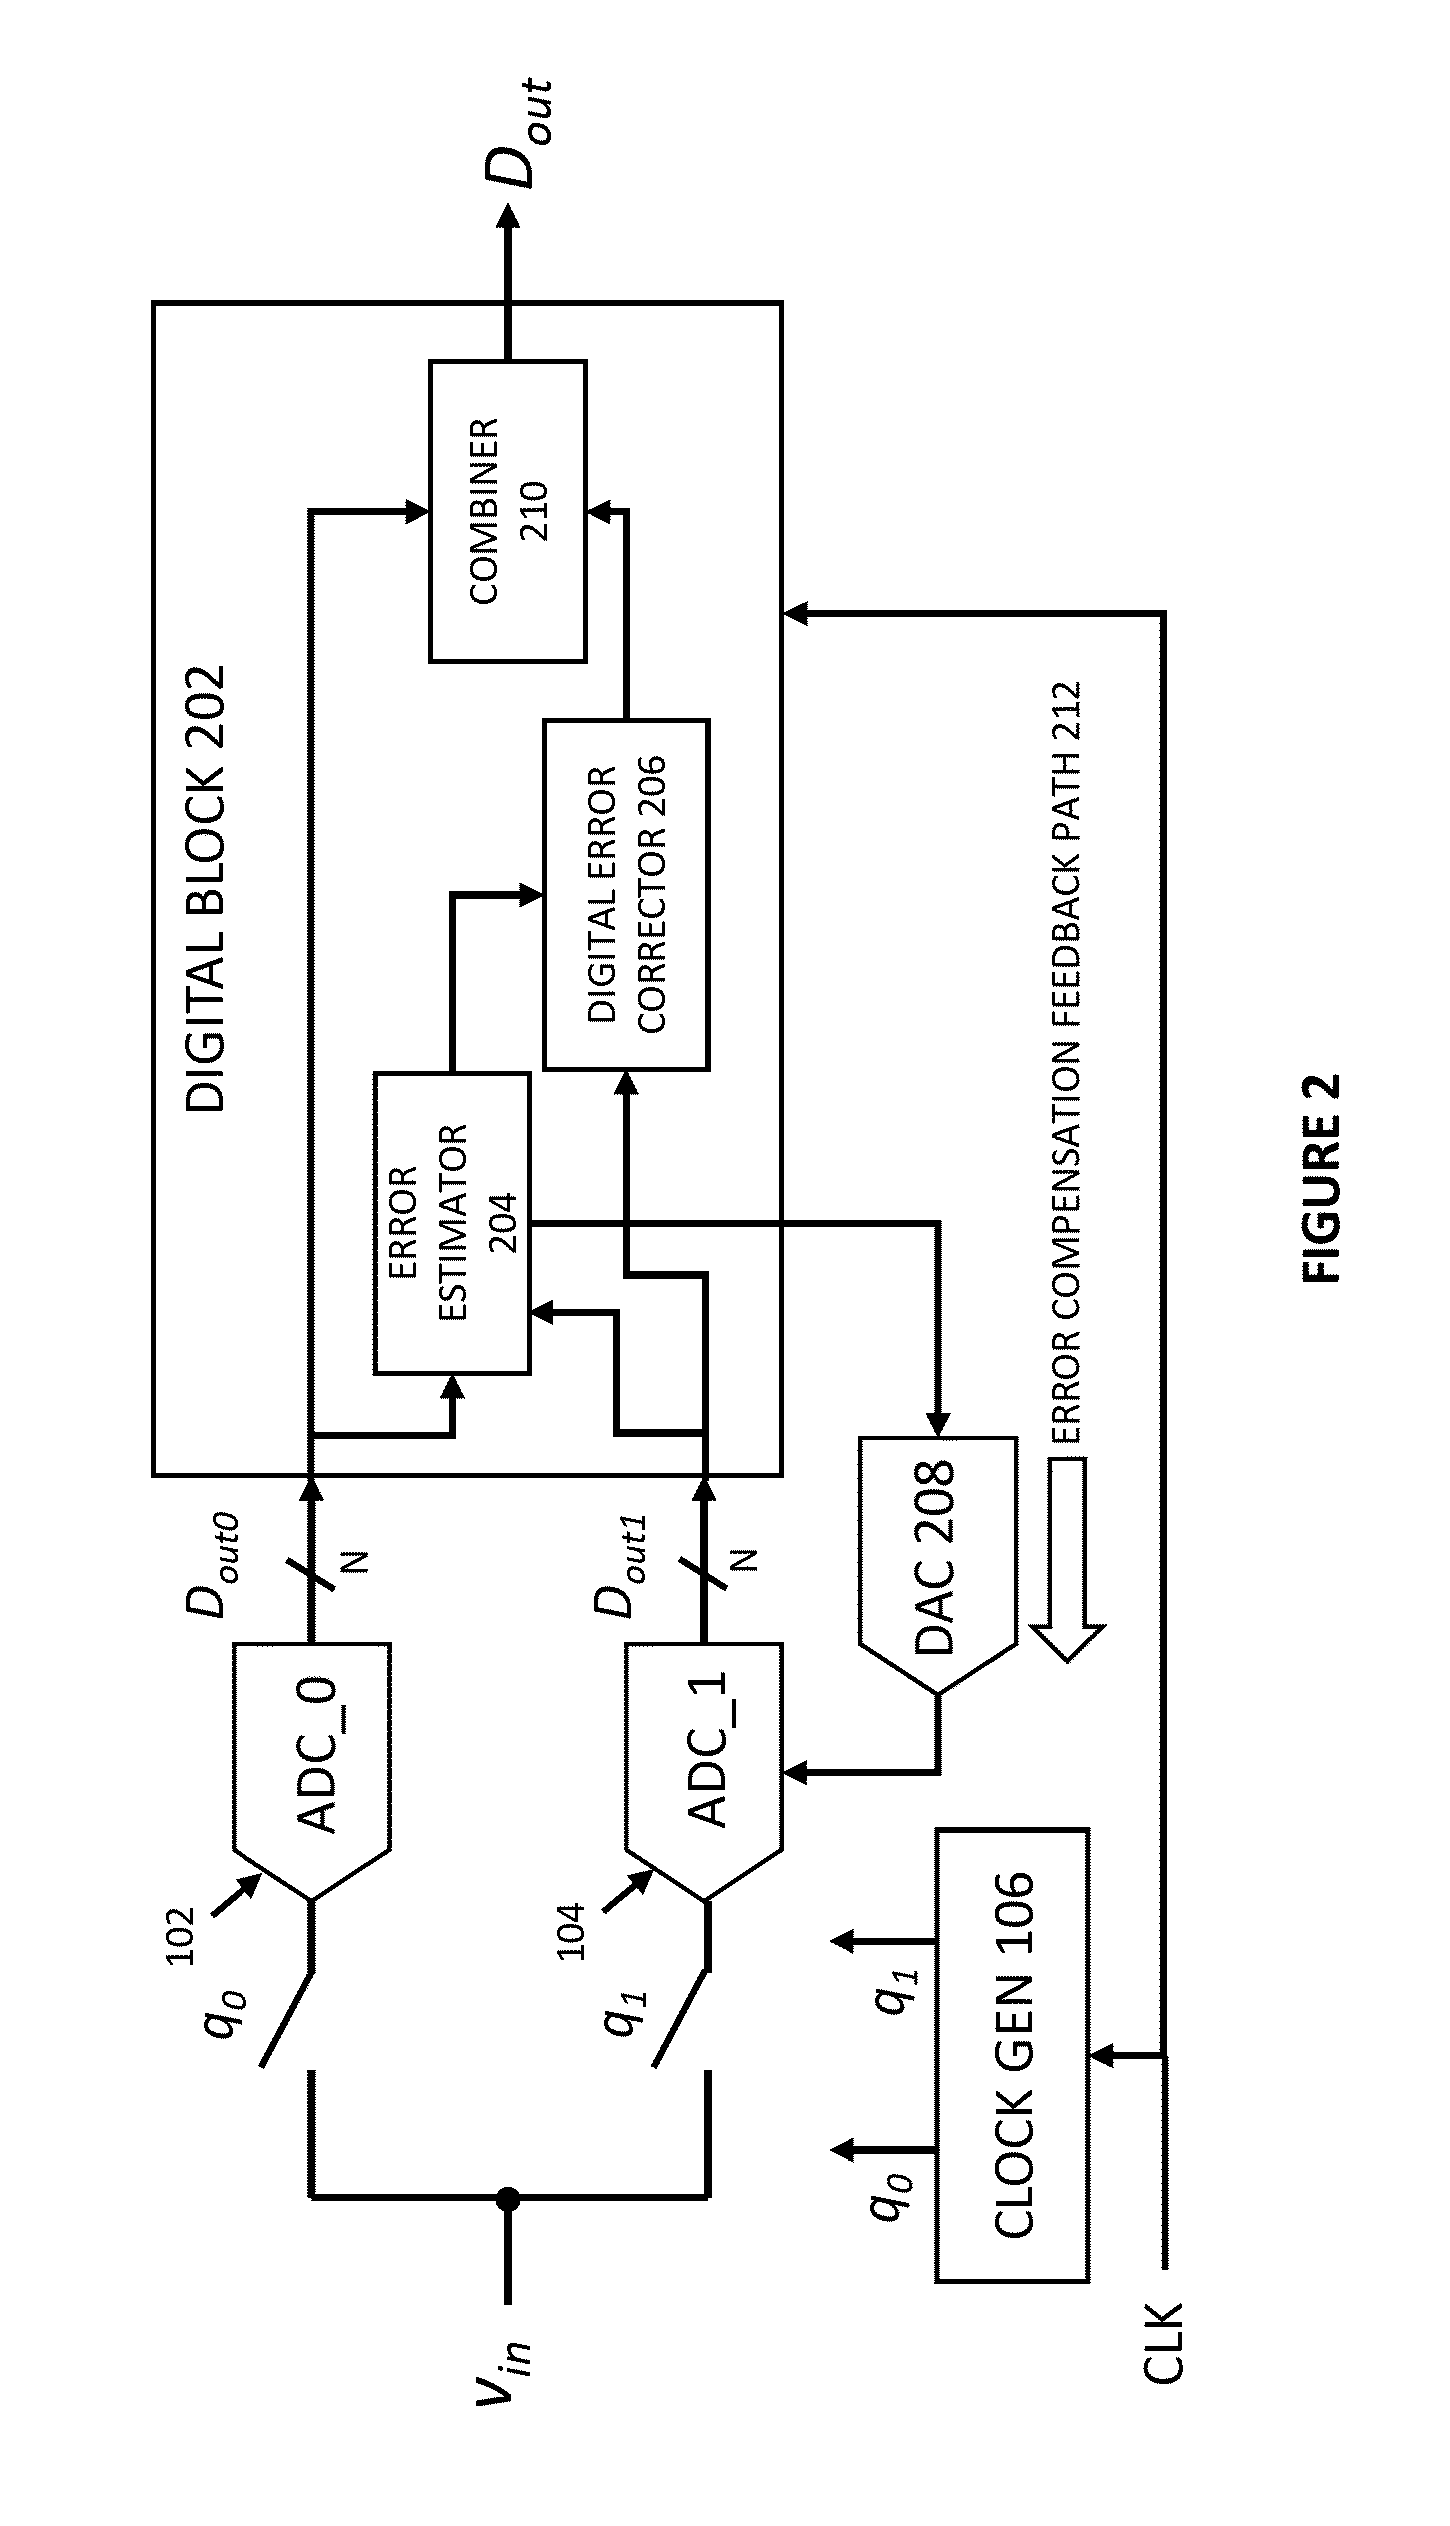 Methods and systems for reducing order-dependent mismatch errors in time-interleaved analog-to-digital converters